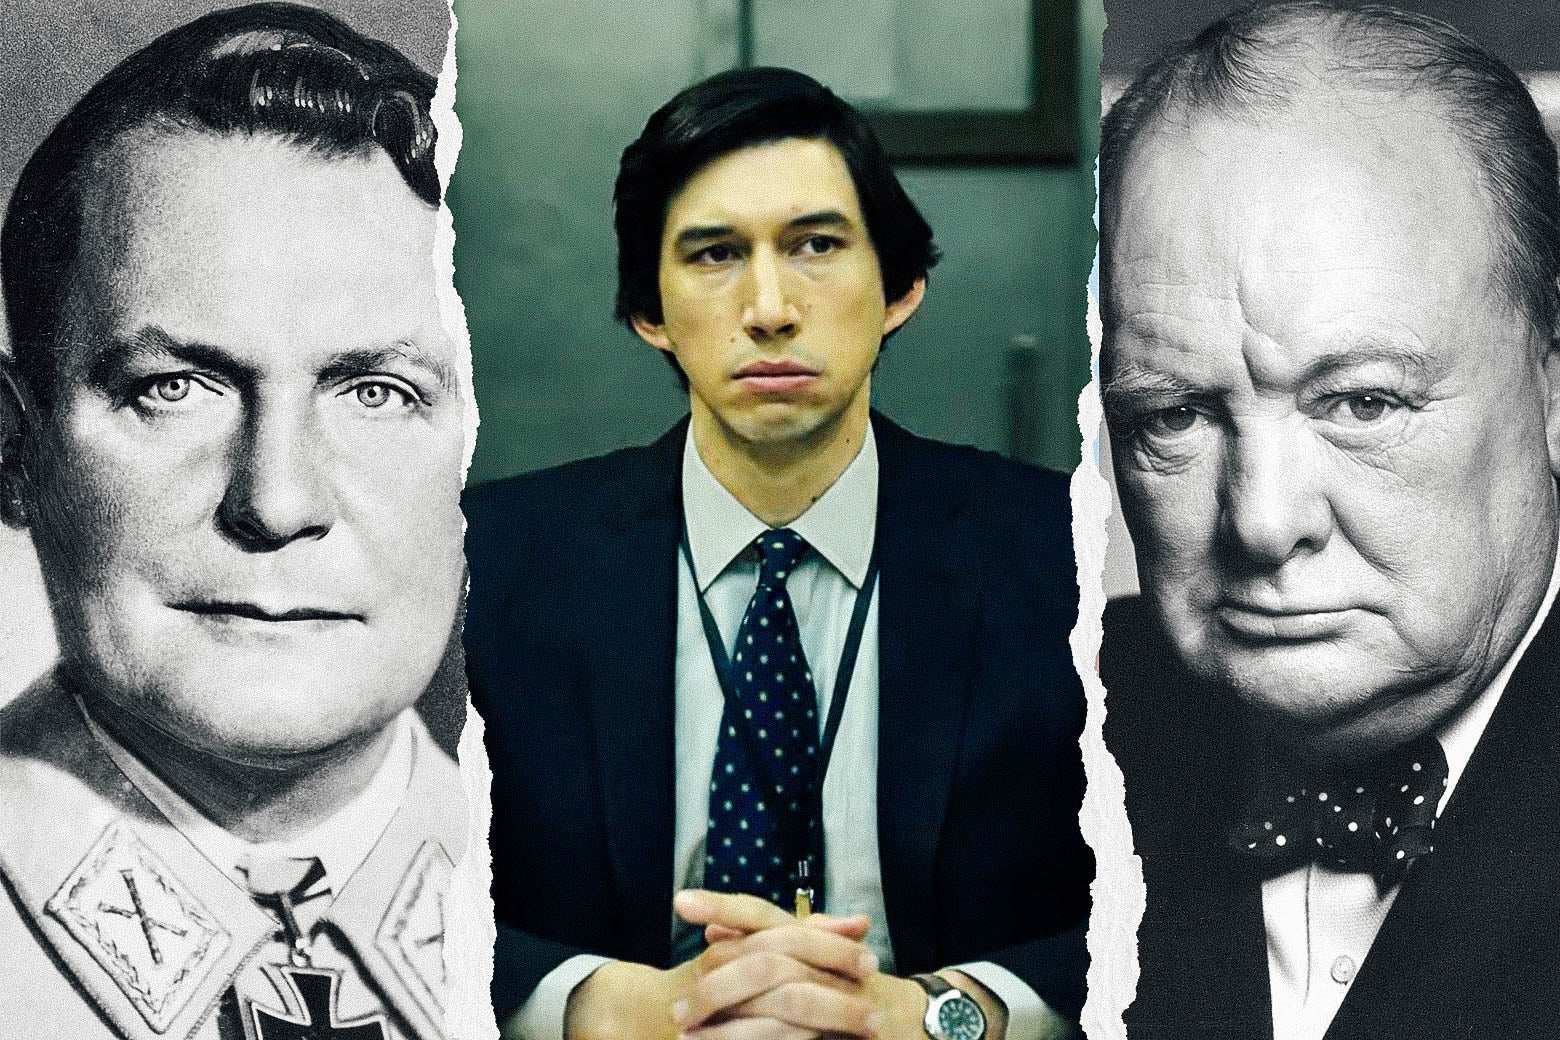 Photo side-by-side of Hermann Göring, Adam Driver, and Winston Churchill